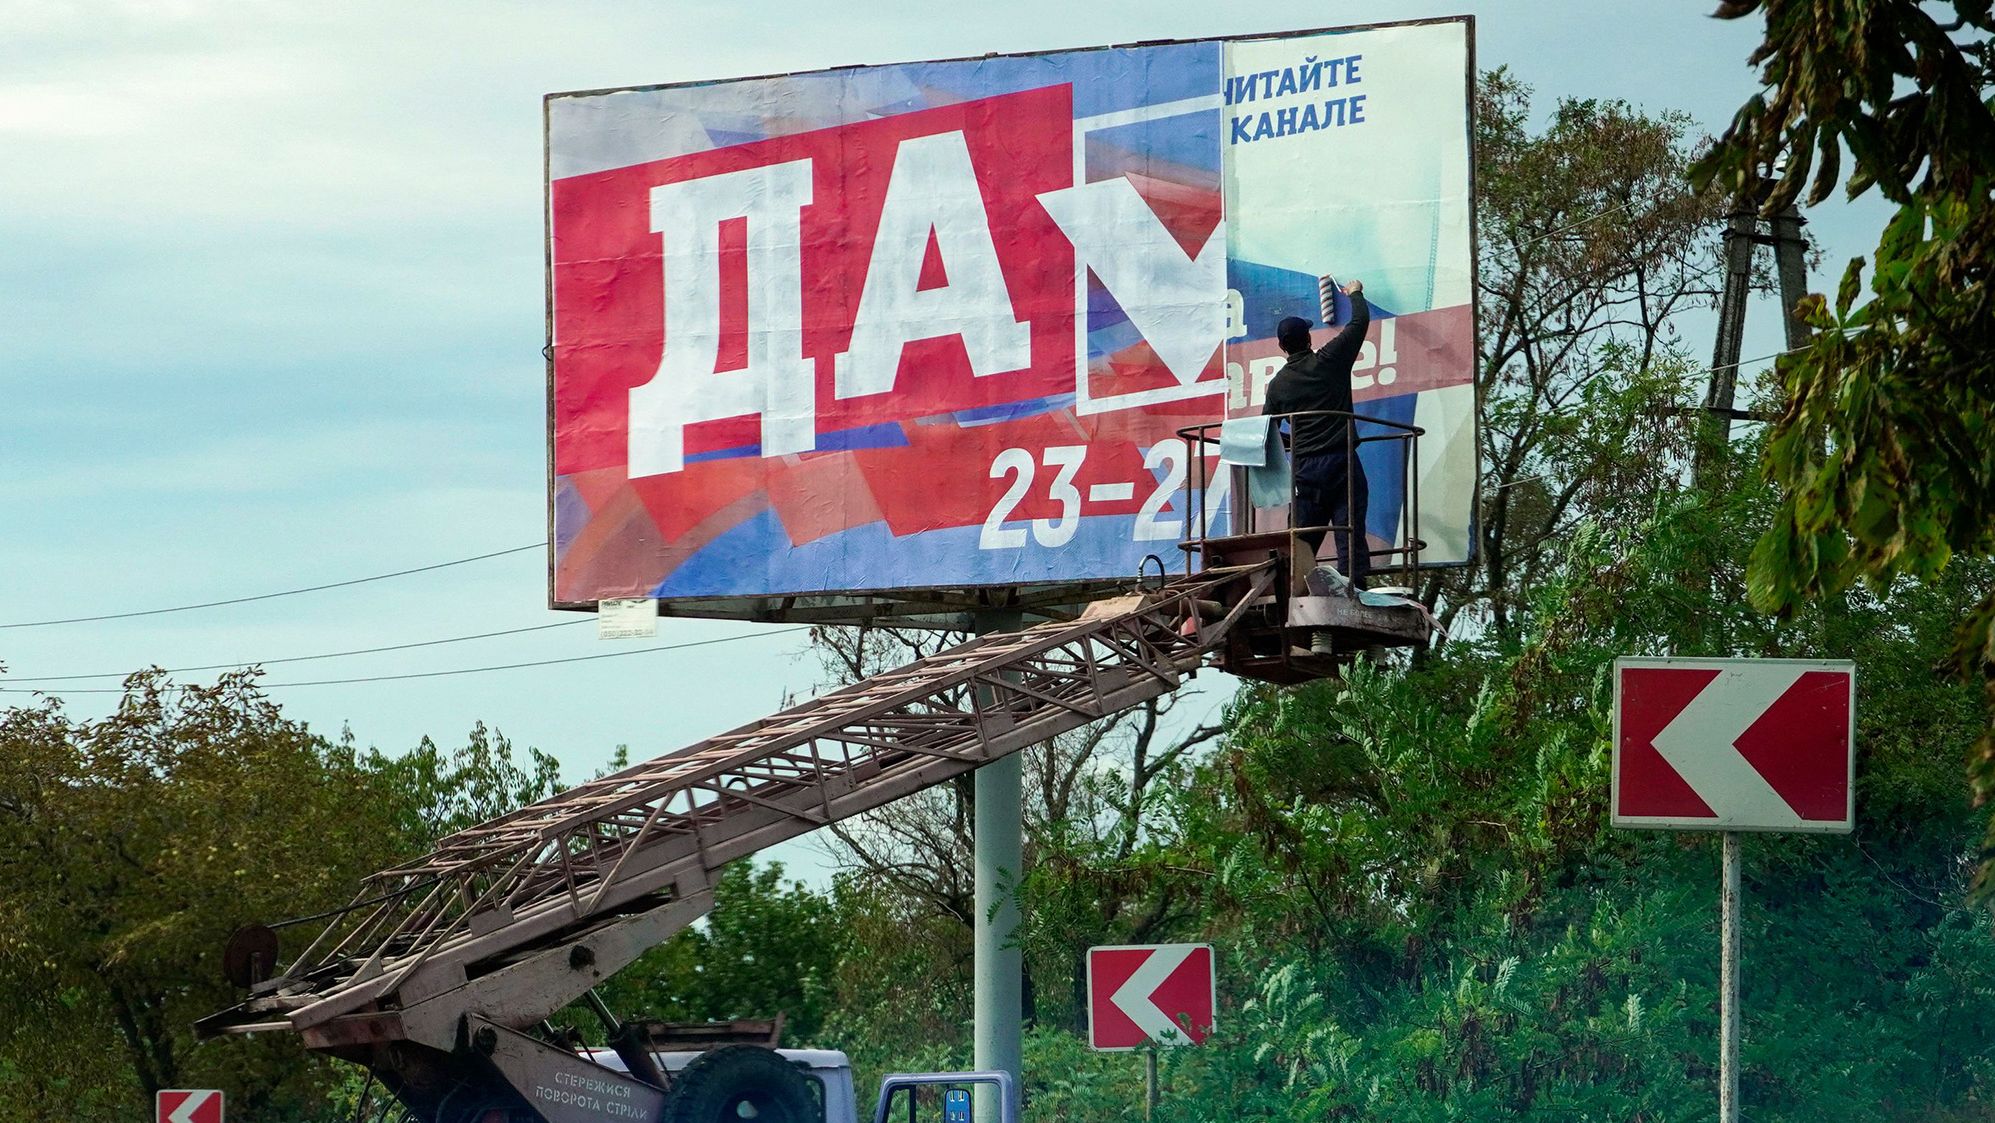 A man glues a <a href="https://edition.cnn.com/2022/09/29/europe/annexation-russia-ukraine-analysis-intl/index.html" target="_blank">referendum</a> poster reading "Yes" in Berdyansk, Ukraine, on September 26. Russia is attempting to annex up to 18% of Ukrainian territory, with President Vladimir Putin expected to host a ceremony in the Kremlin to declare four occupied Ukrainian territories part of Russia.